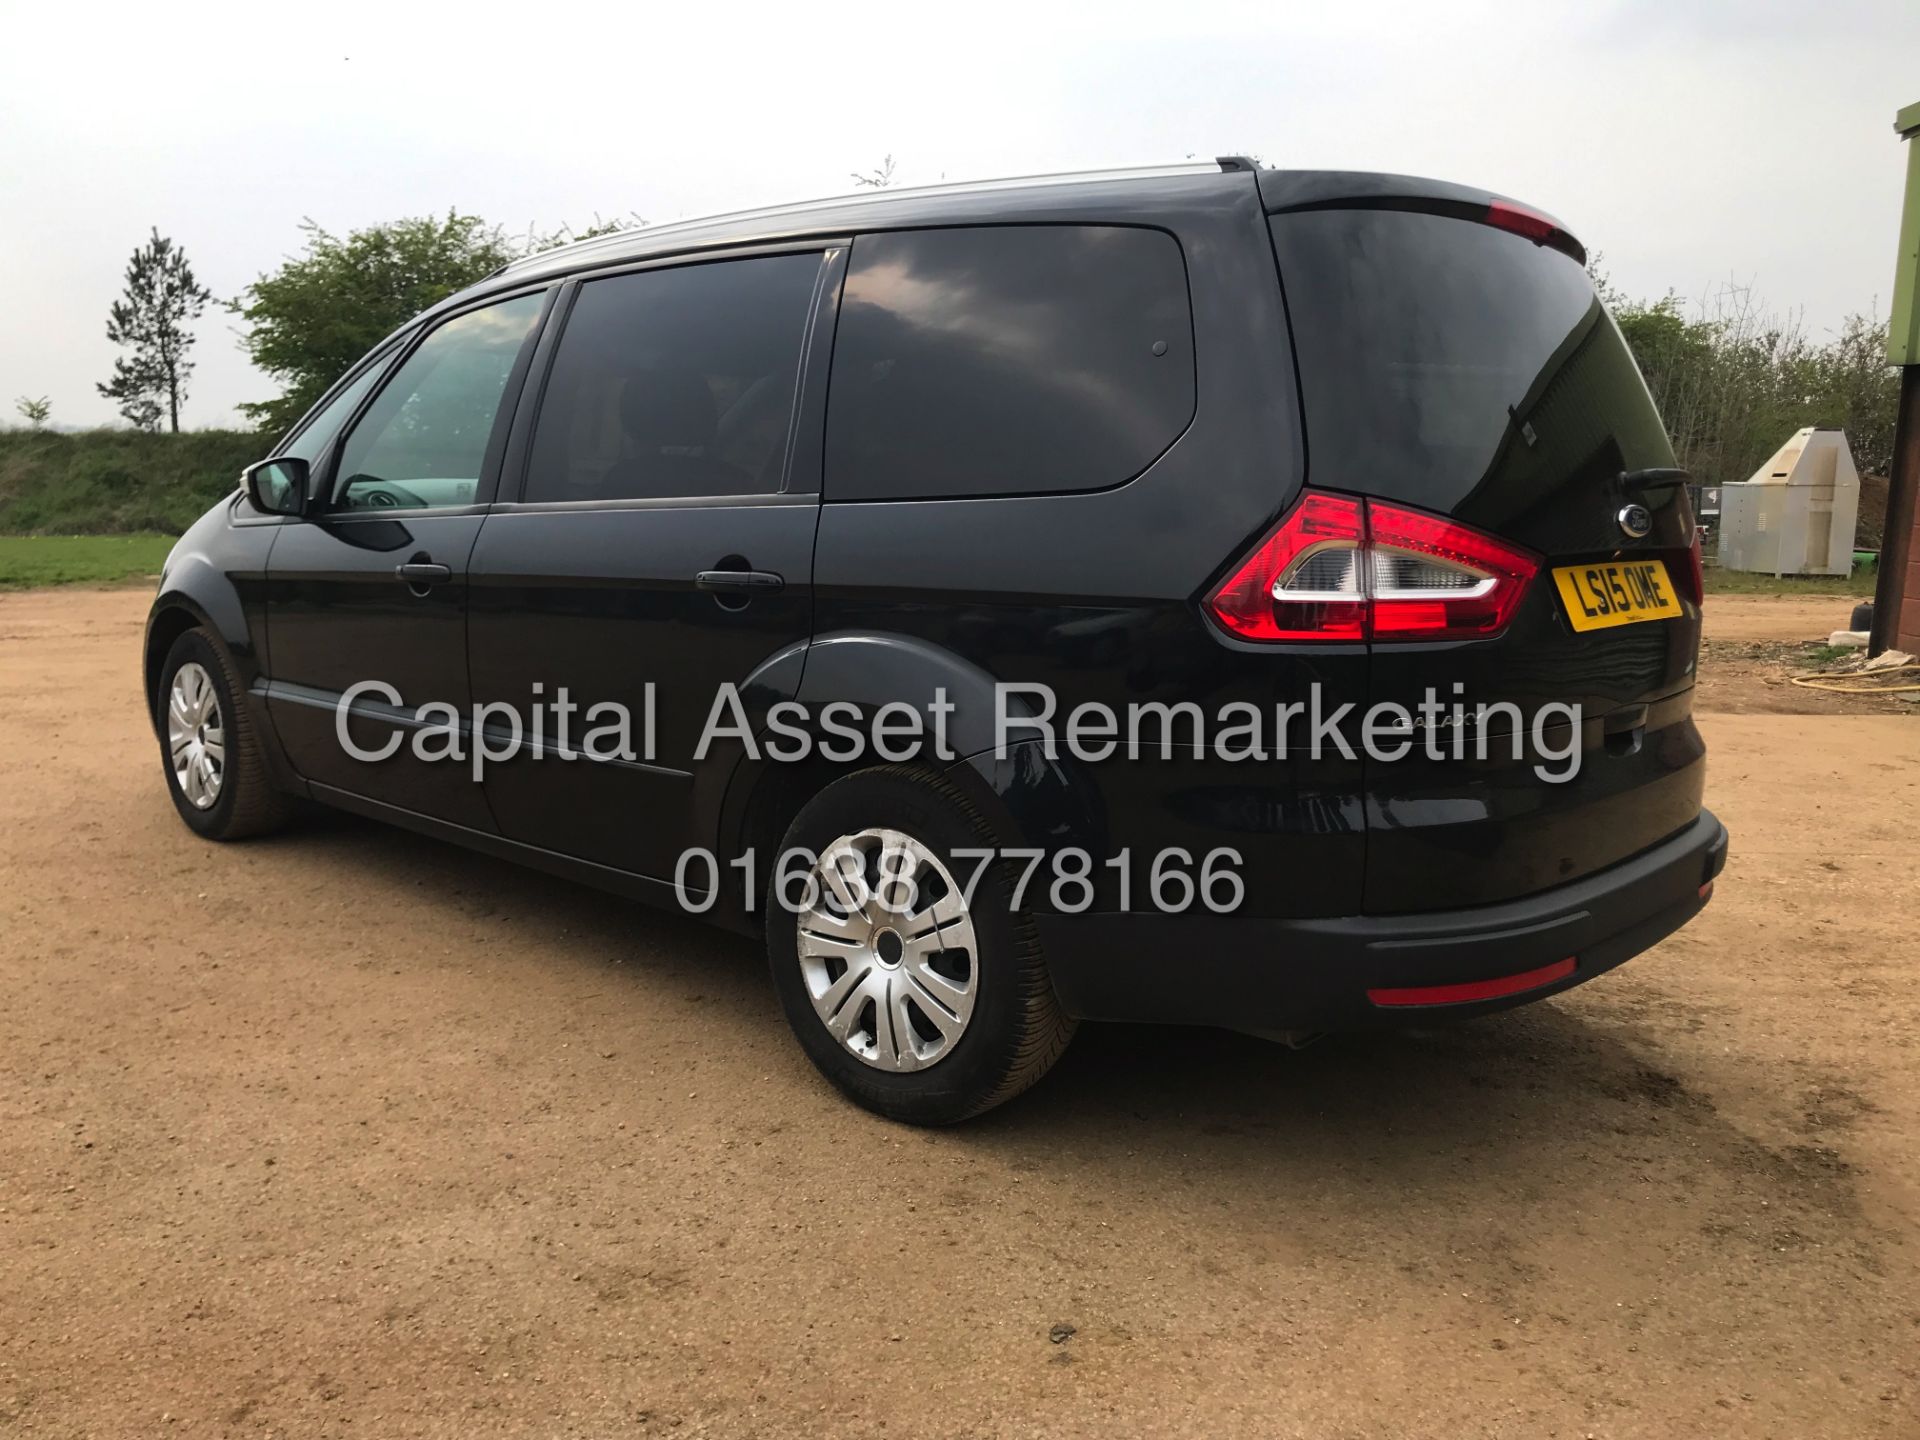 FORD GALAXY 2.0 TDCI "POWER-SHIFT / ZETEC" 7 SEATER (15 REG - NEW SHAPE) 1 OWNER - 140BHP - AIR CON - Image 5 of 22